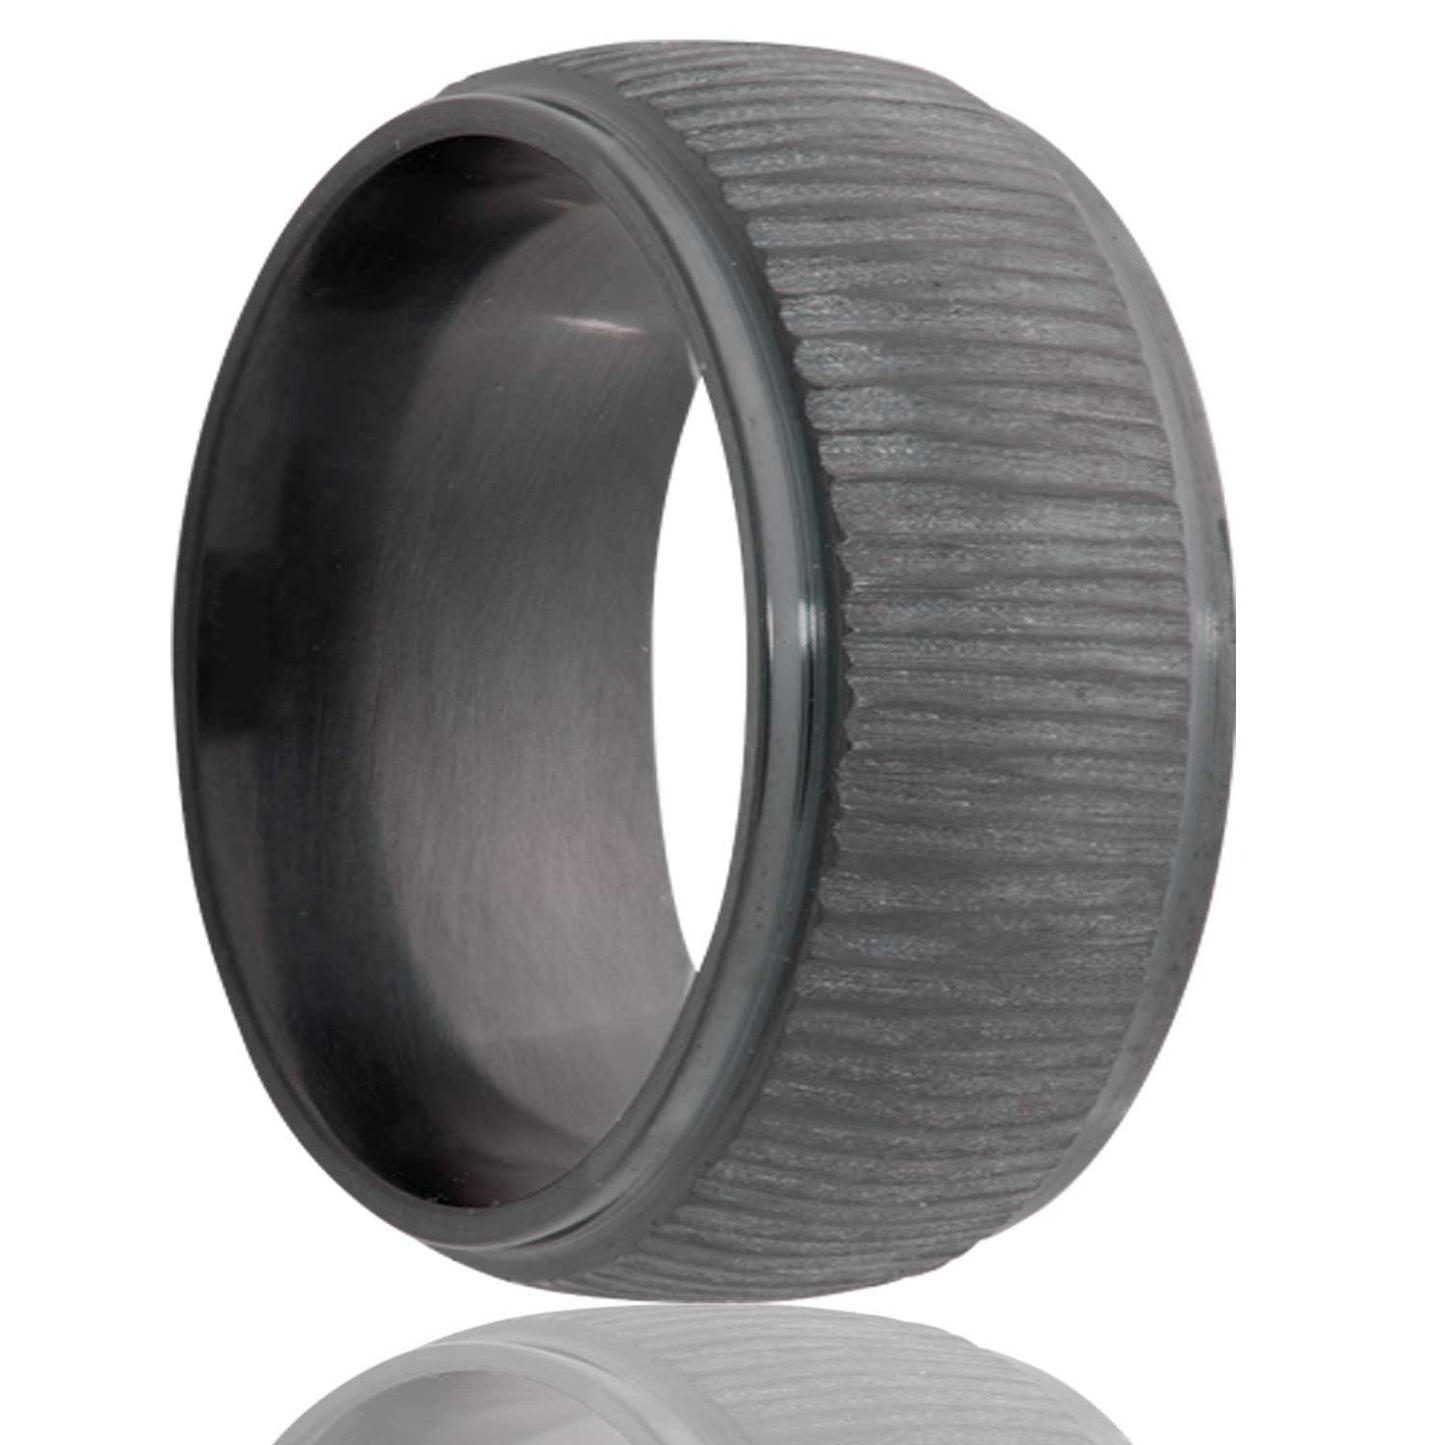 A treebark domed zirconium wedding band with stepped edges displayed on a neutral white background.